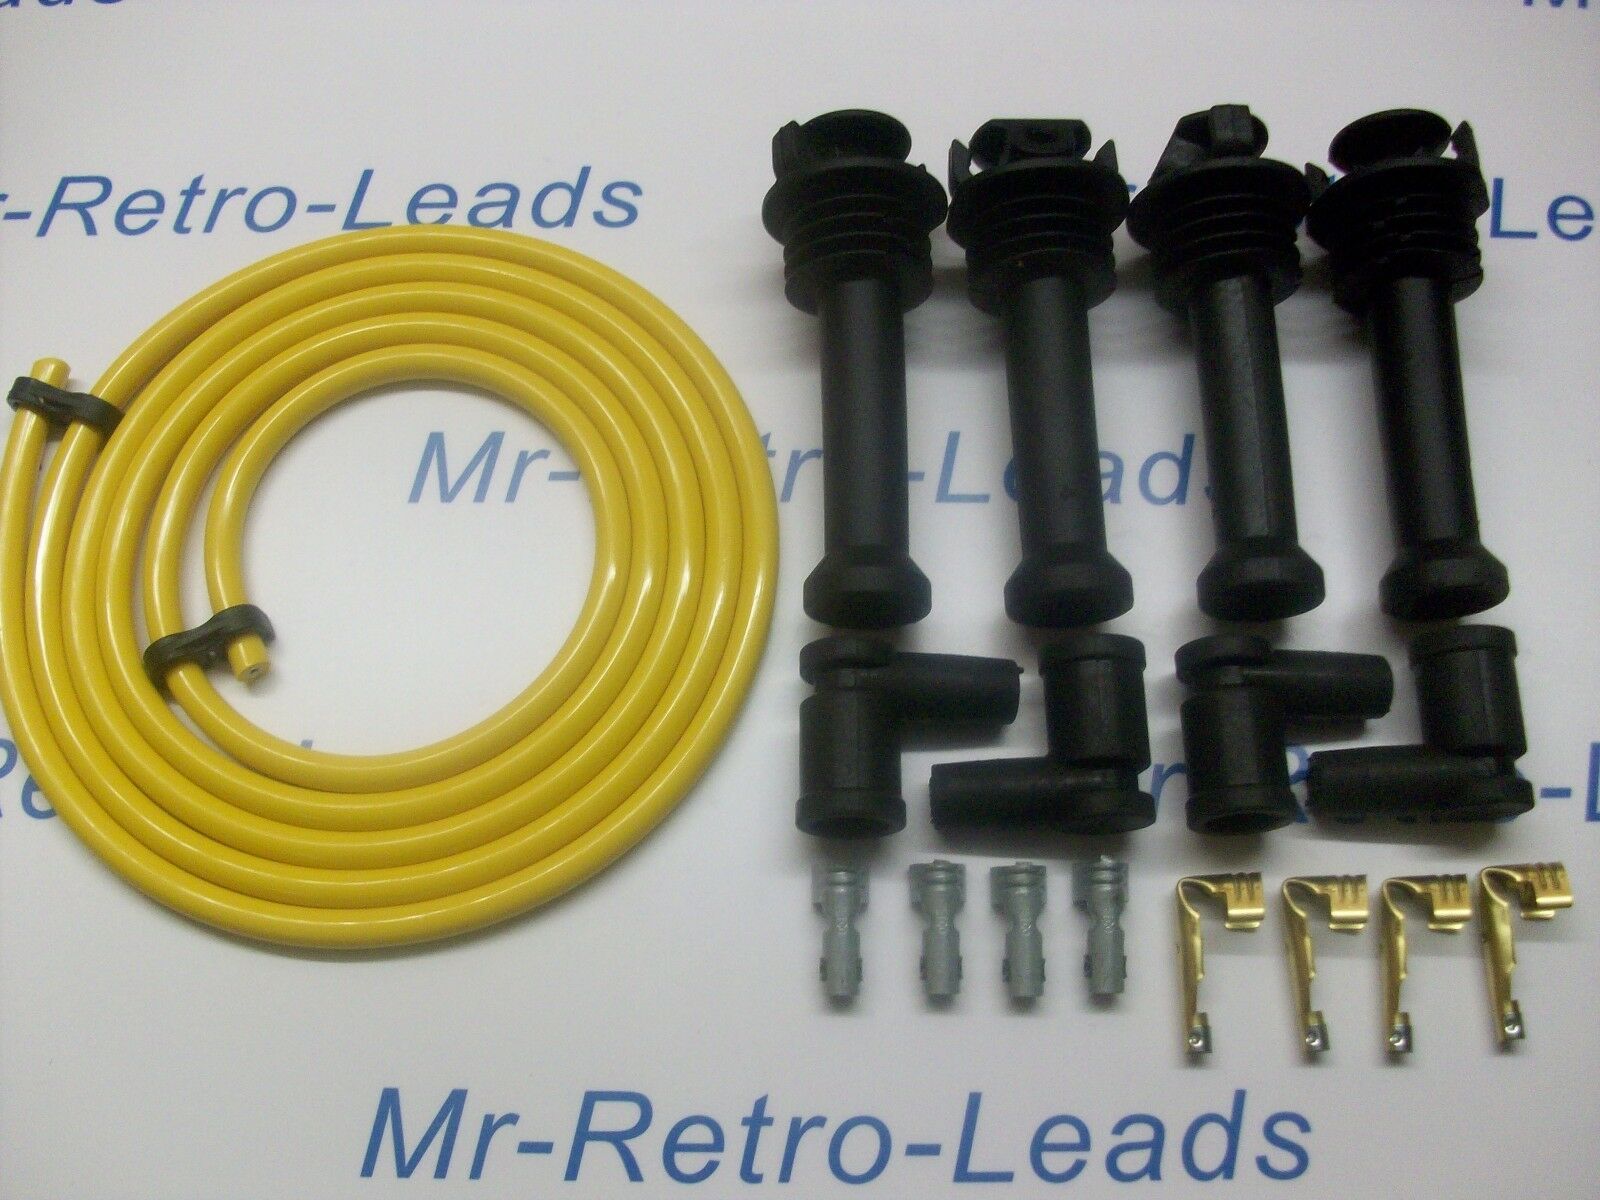 Yellow 8mm Performance Ignition Lead Kit For Ford Silver Top Kit Cars 117mm Boot